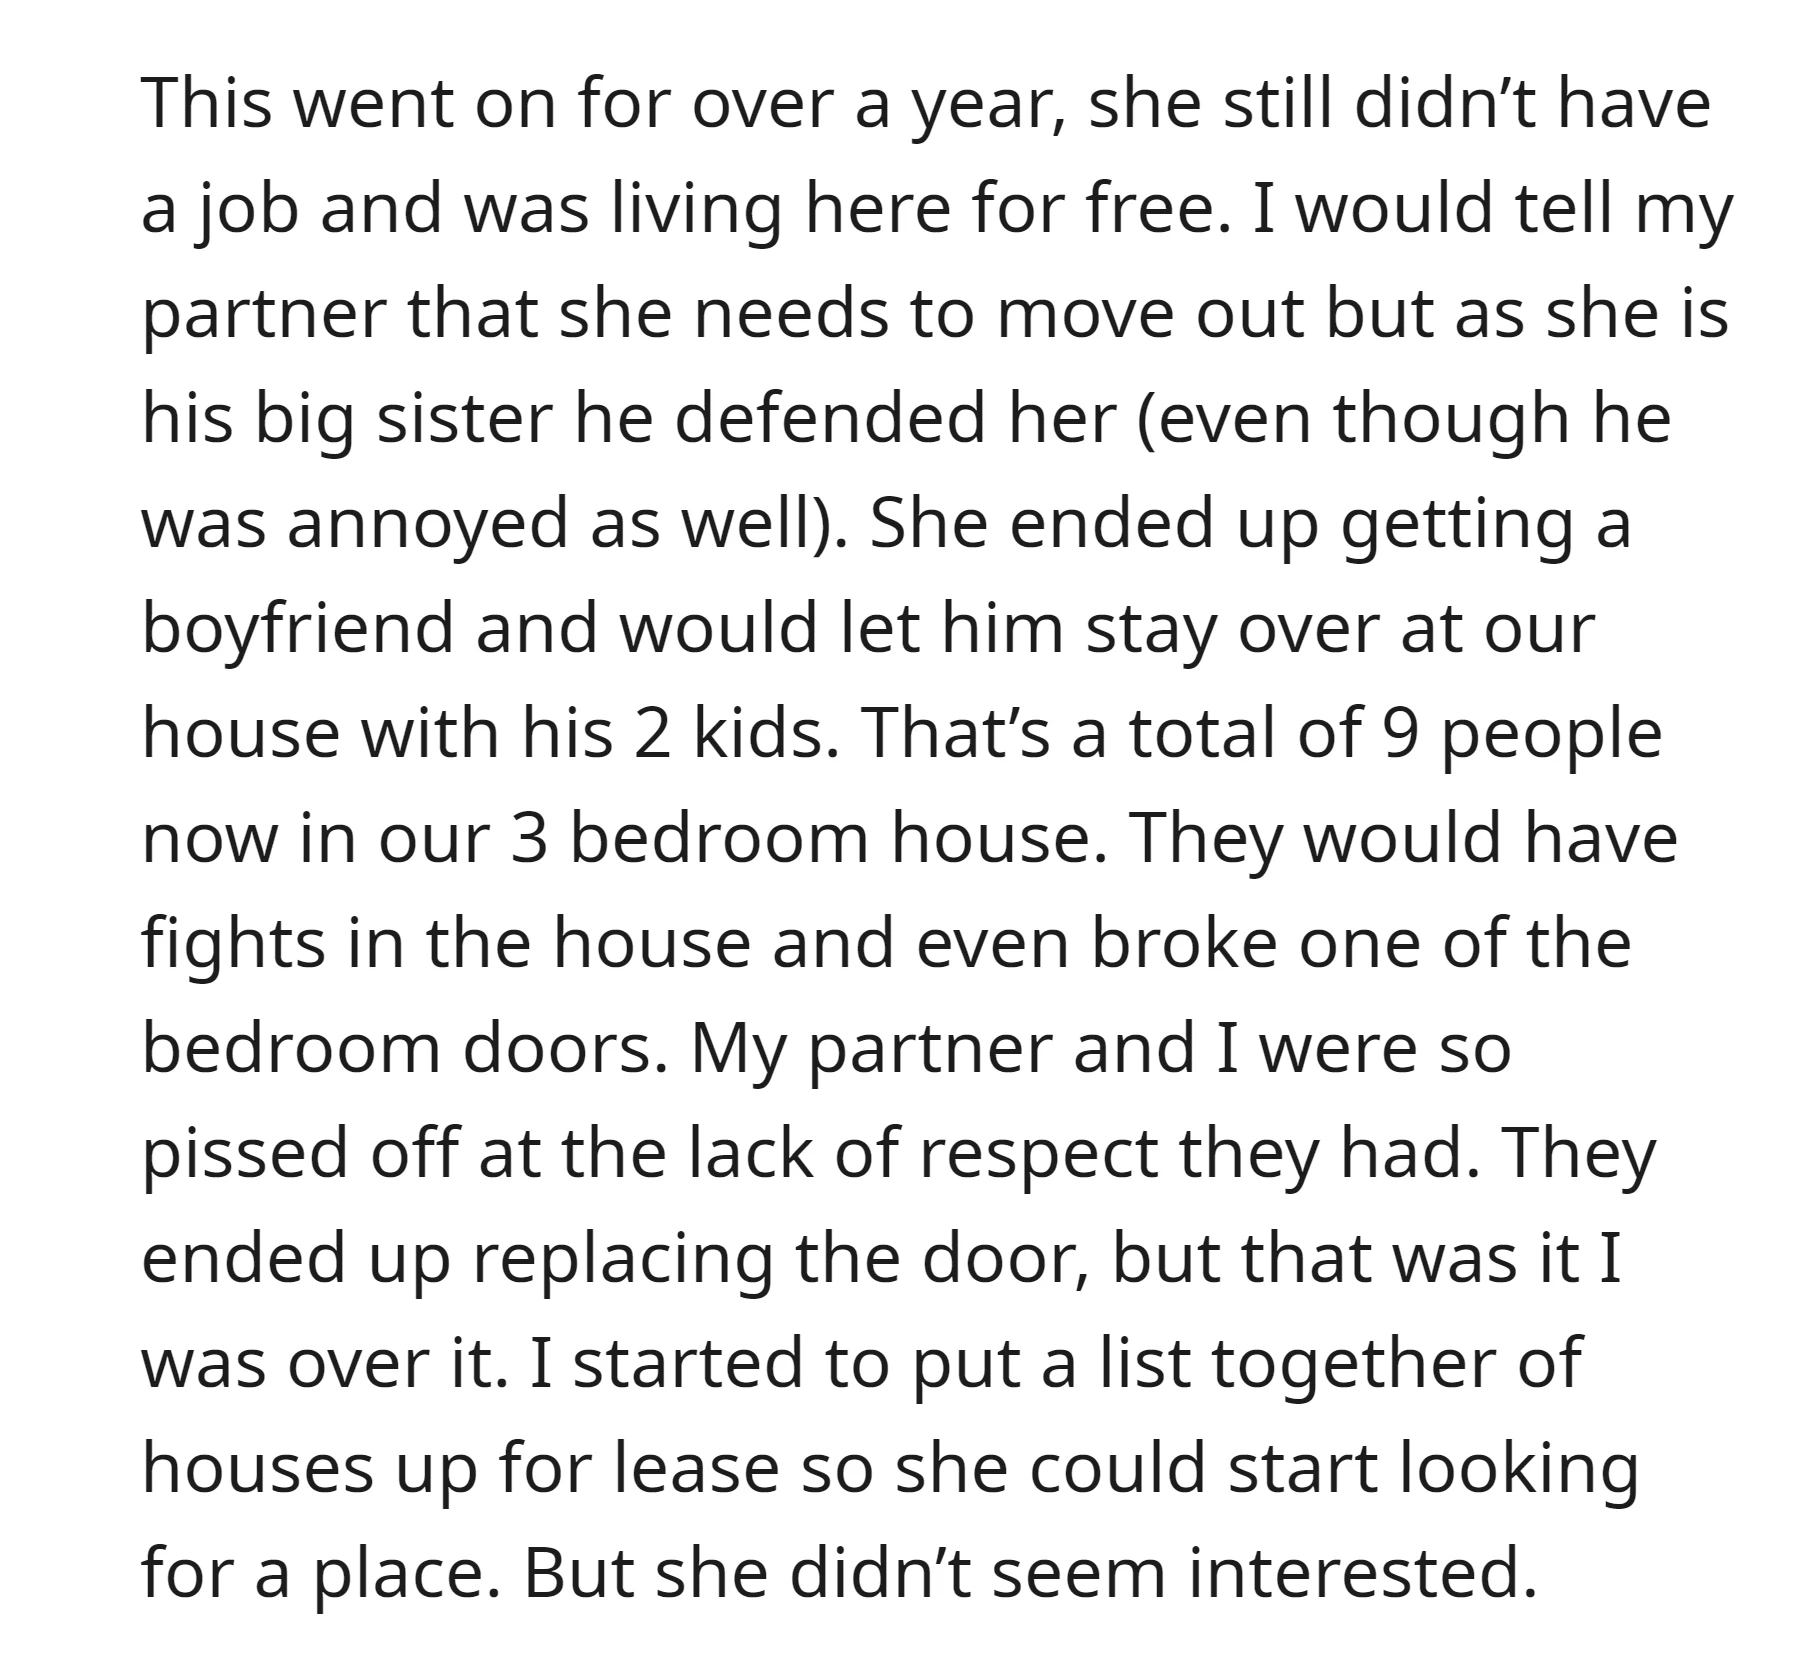 The OP compiled a list of available houses for lease, but the sister-in-law showed little interest in moving out